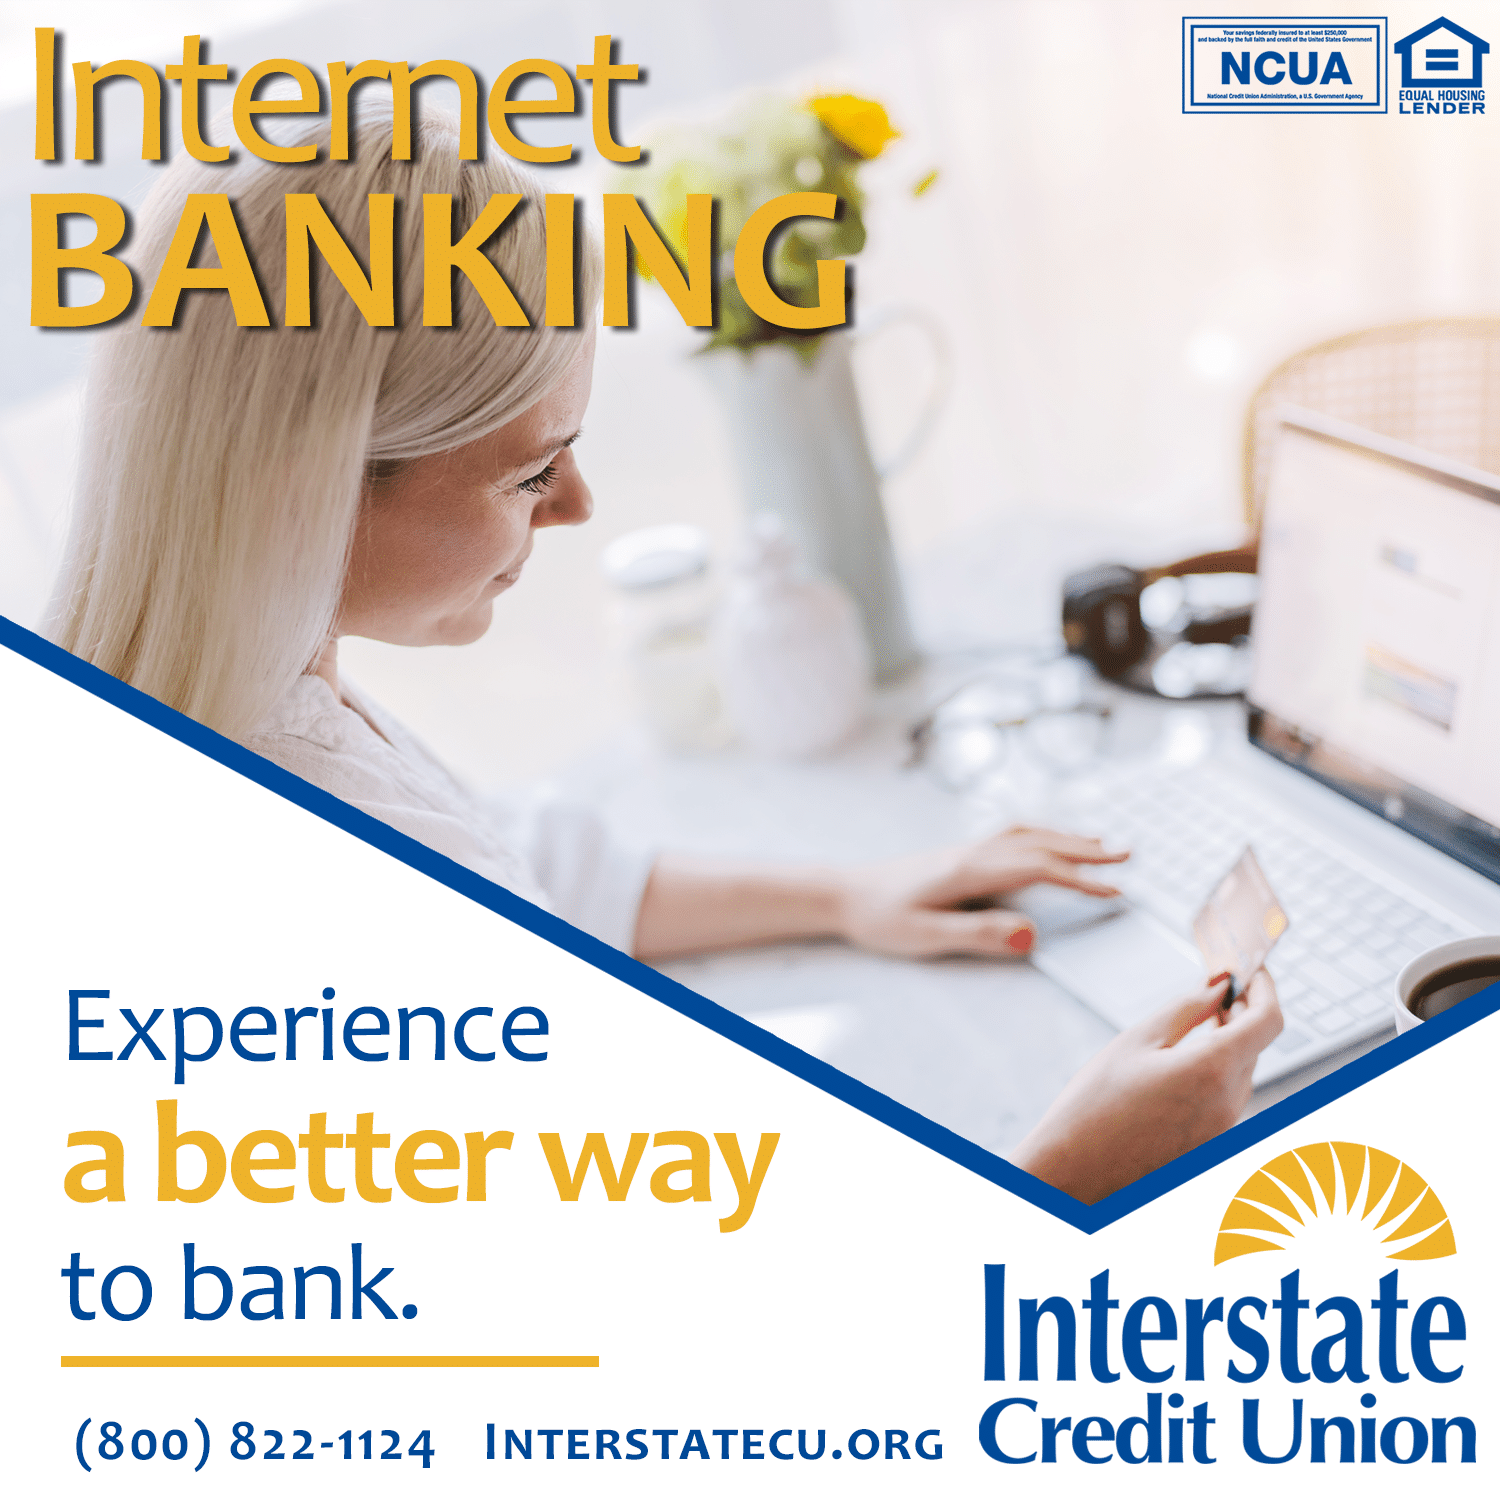 For more information, call Interstate Credit Union (800)822-1124!